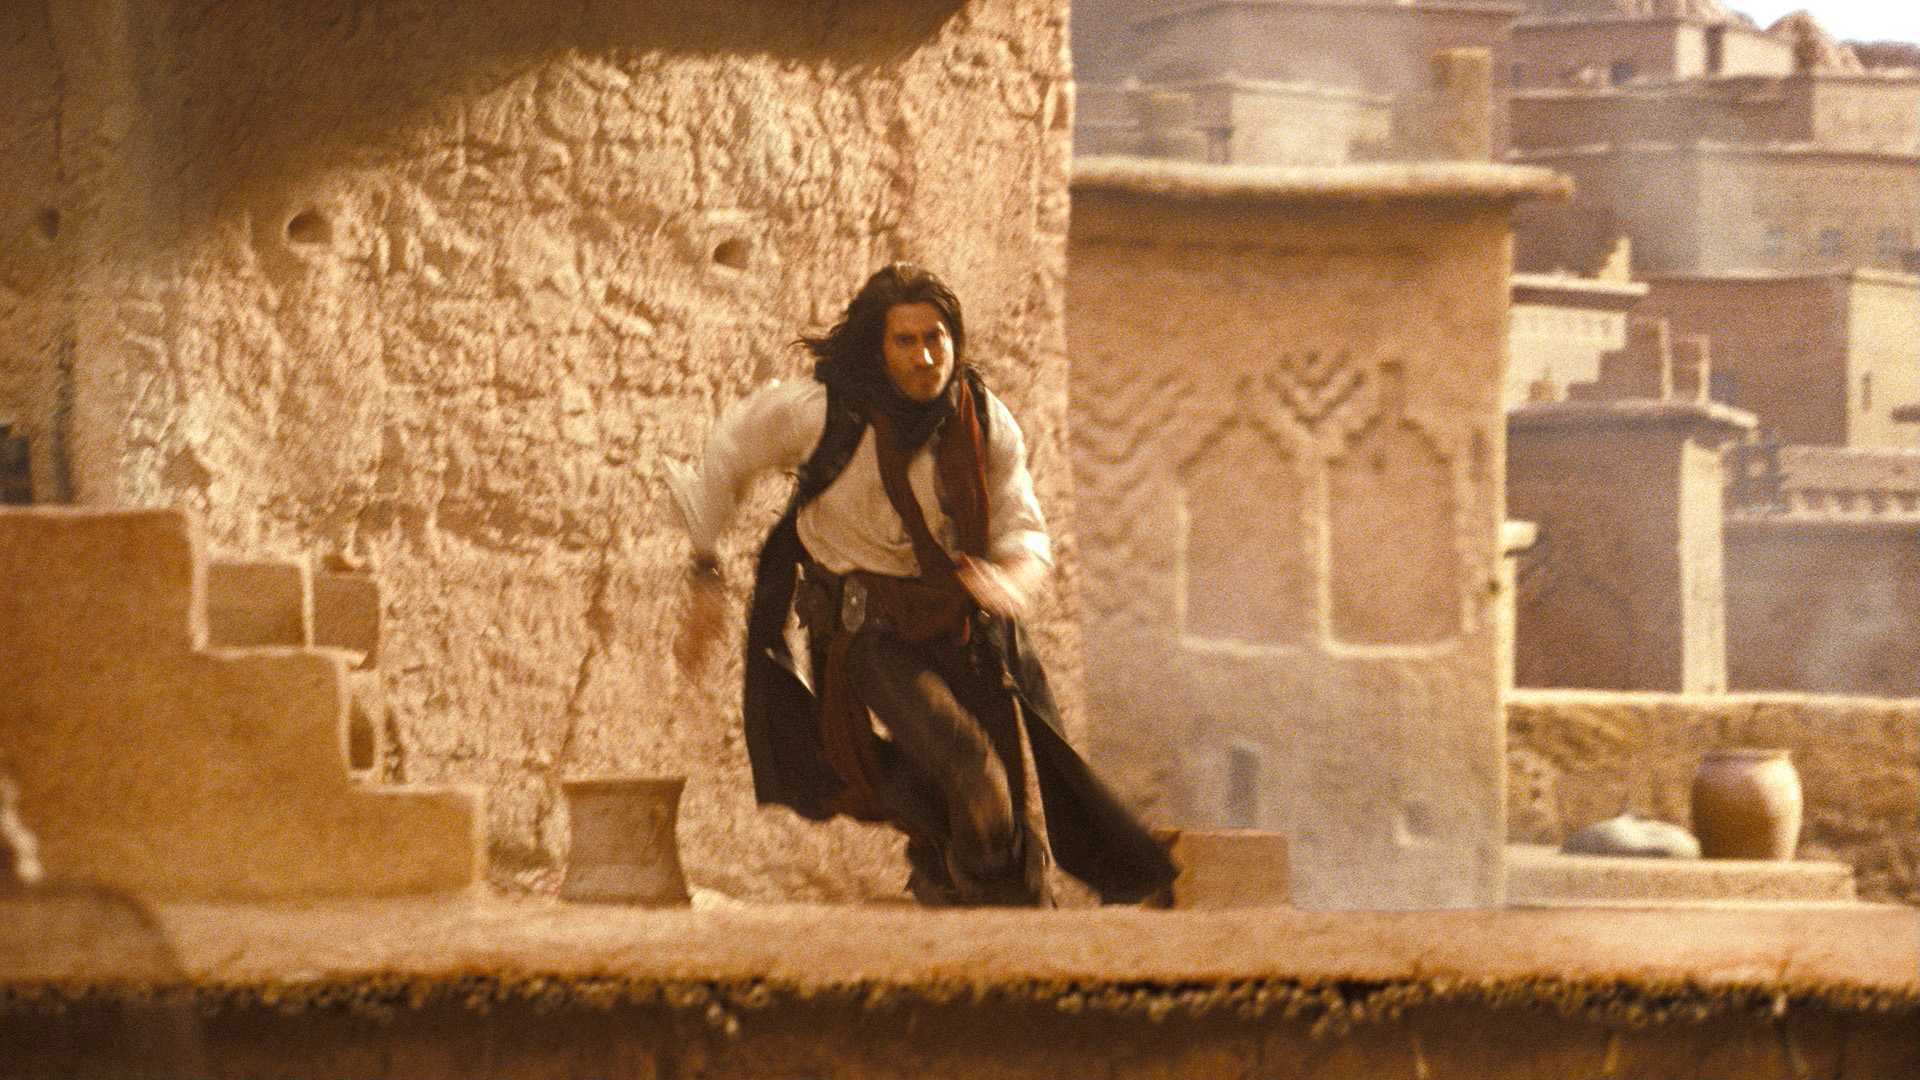 Prince of Persia The Sands of Time wallpaper #34 - 1920x1080